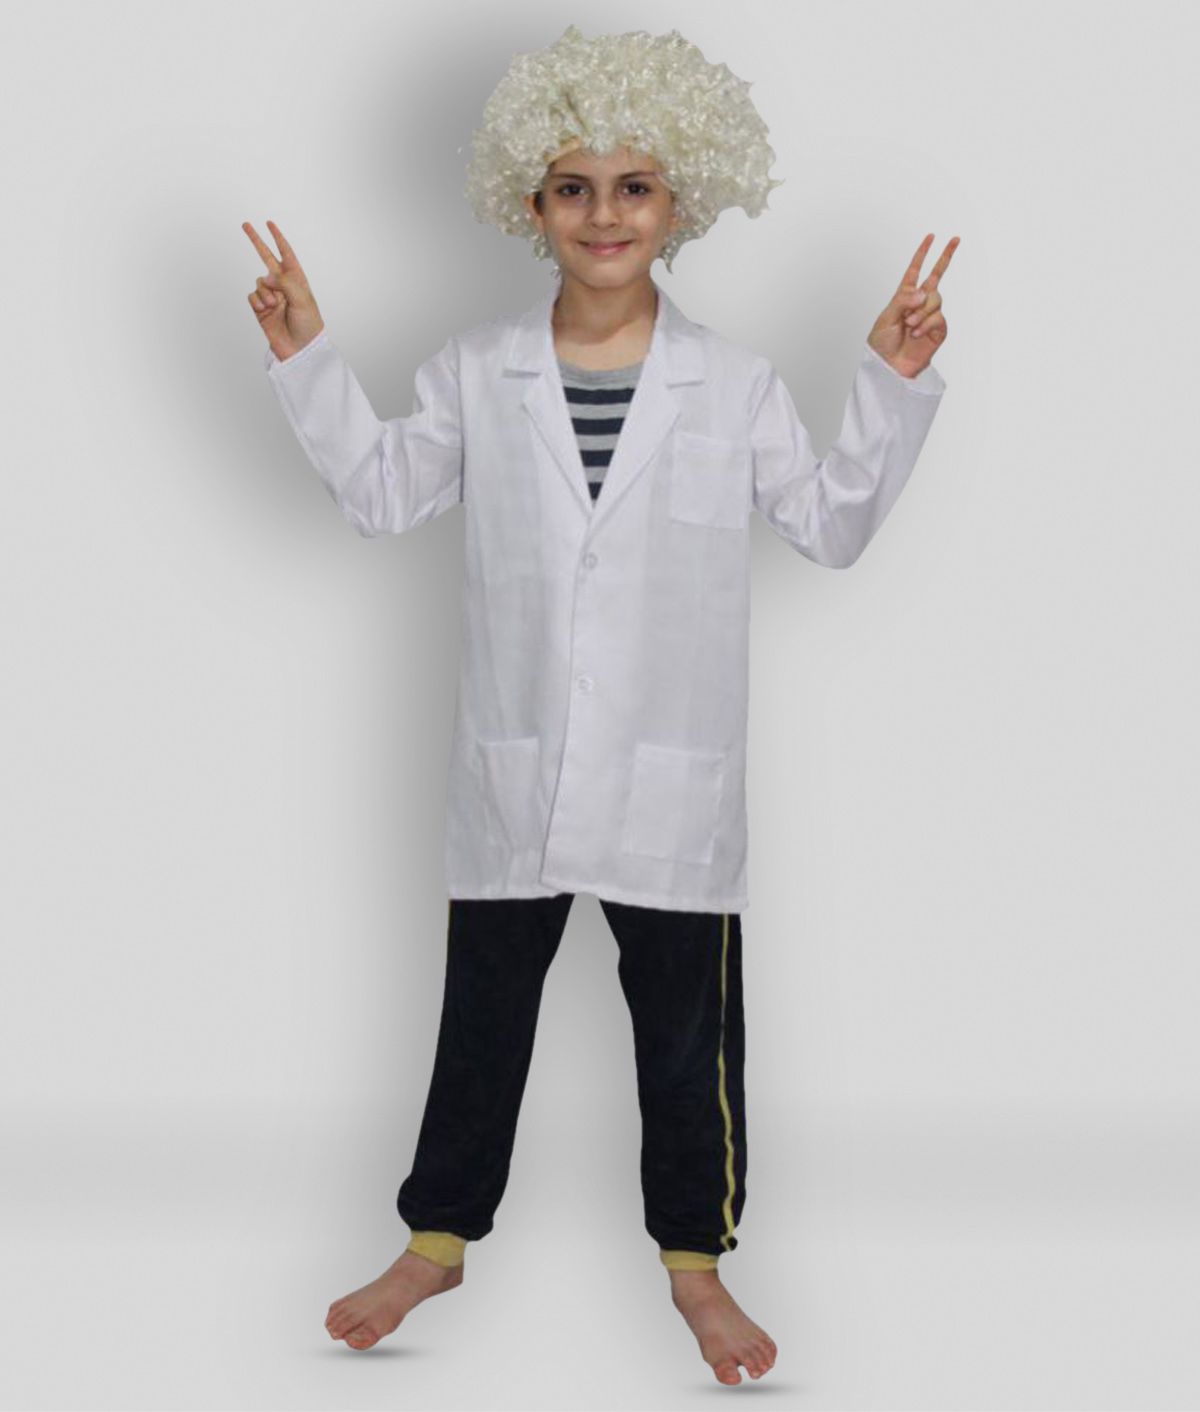     			Kaku Fancy Dresses Einstine Costume,Scientist Costume For Kids School Annual function/Theme Party/Competition/Stage Shows Dress